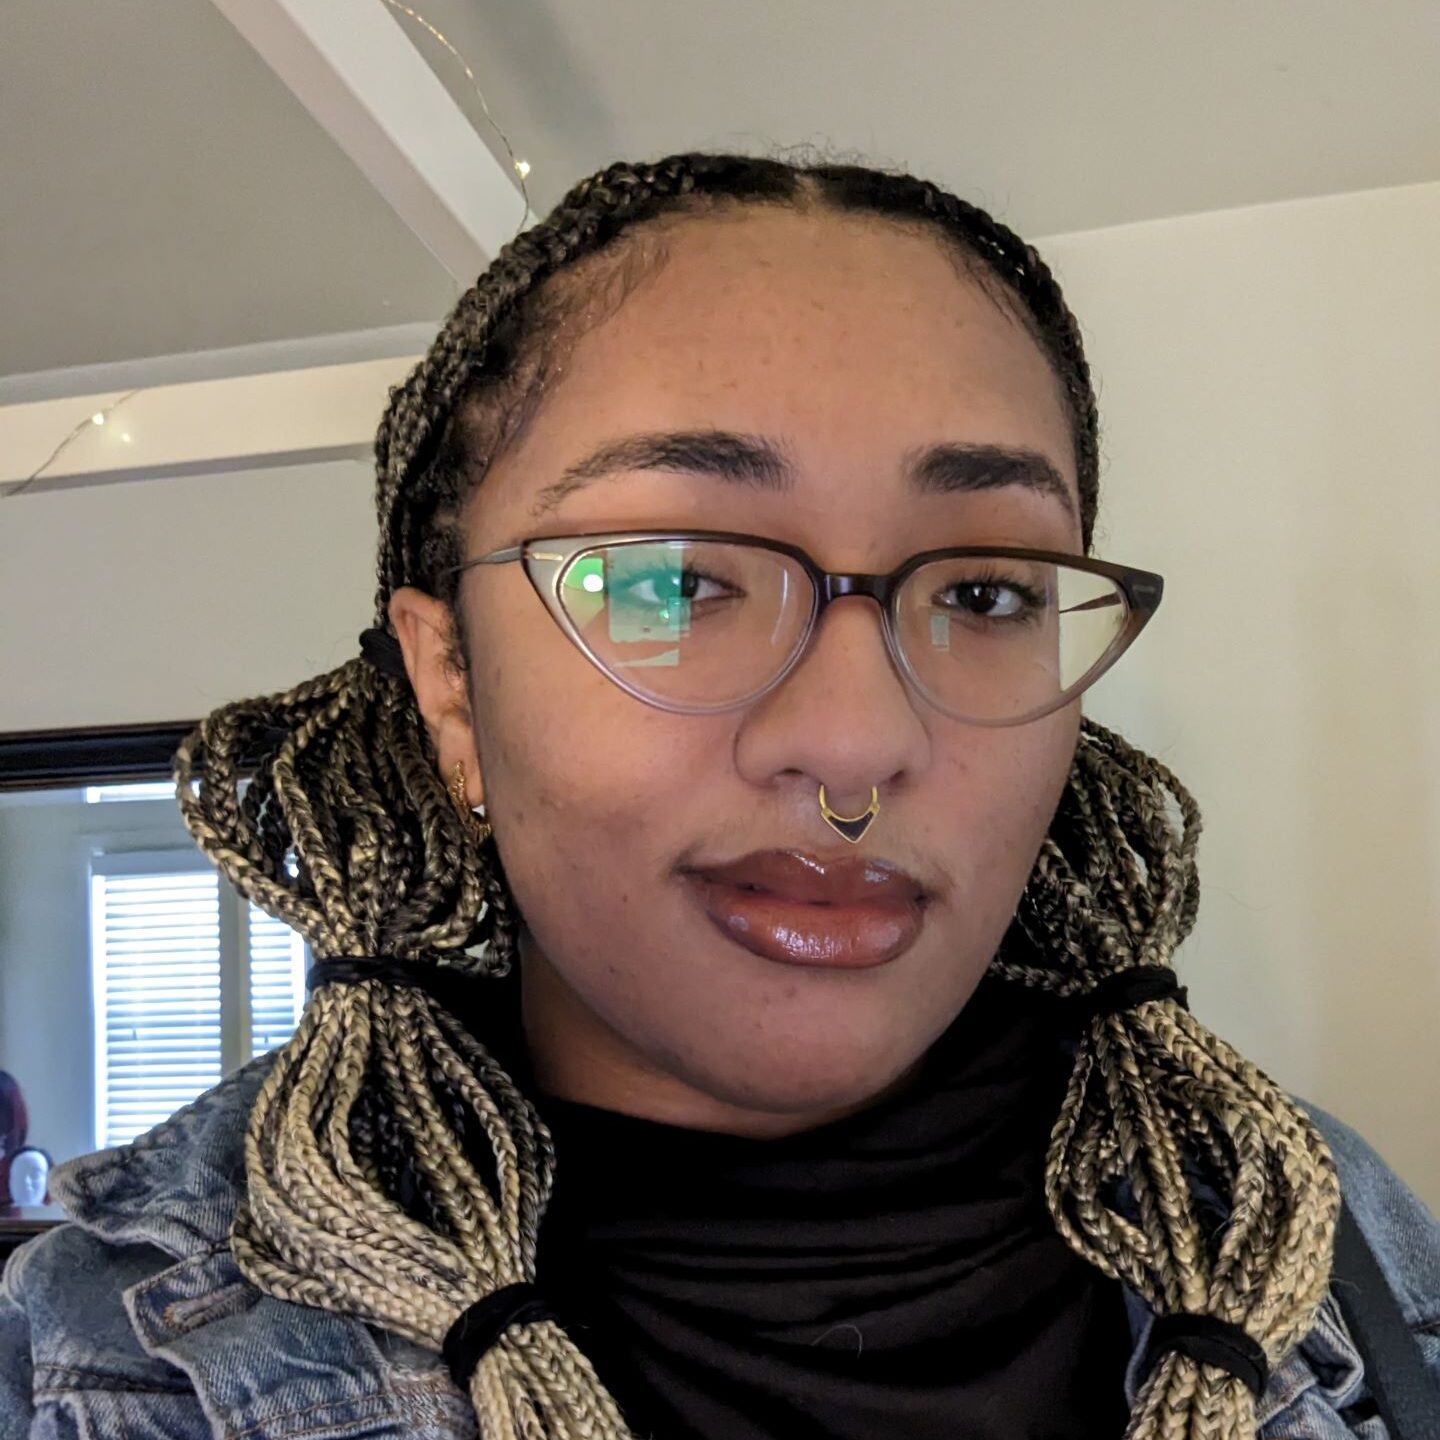 A Black non-binary person with braids and glasses.